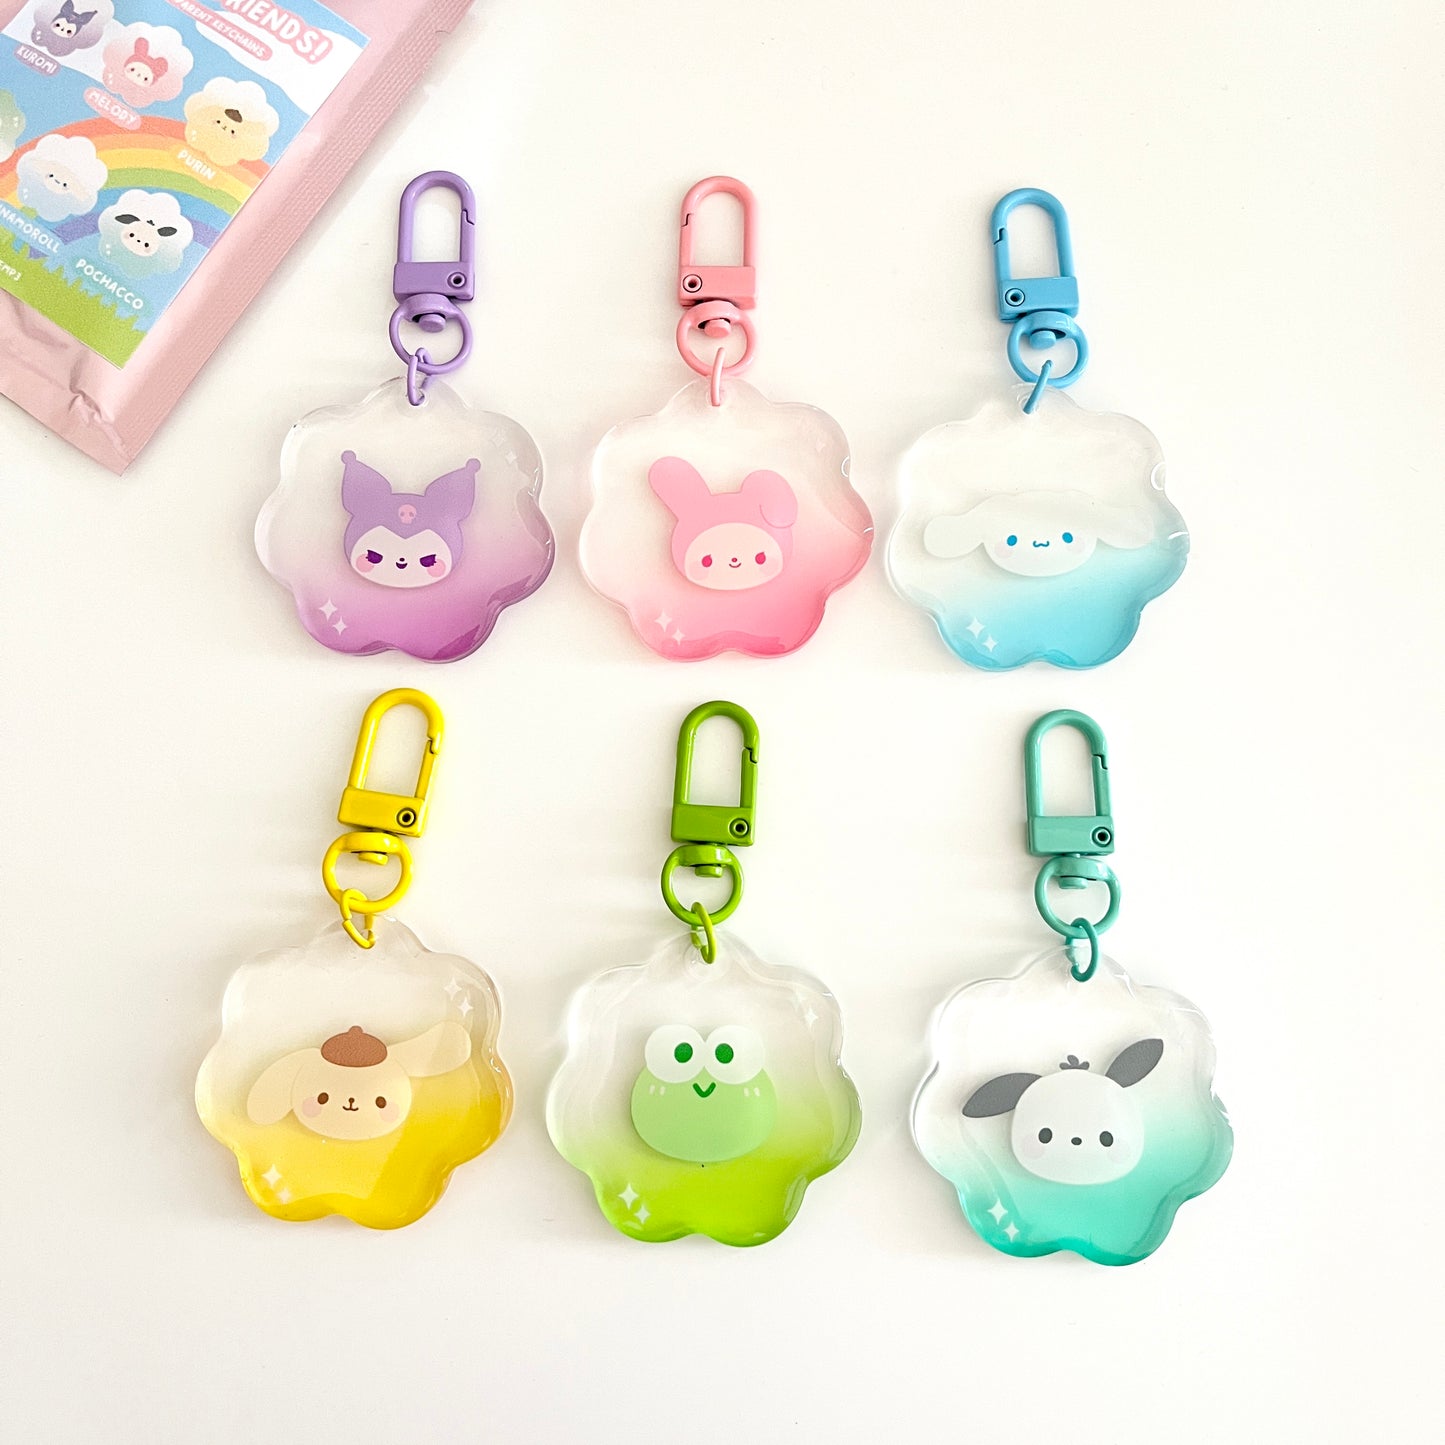 Sanrio Candy Keychain Blind Bags